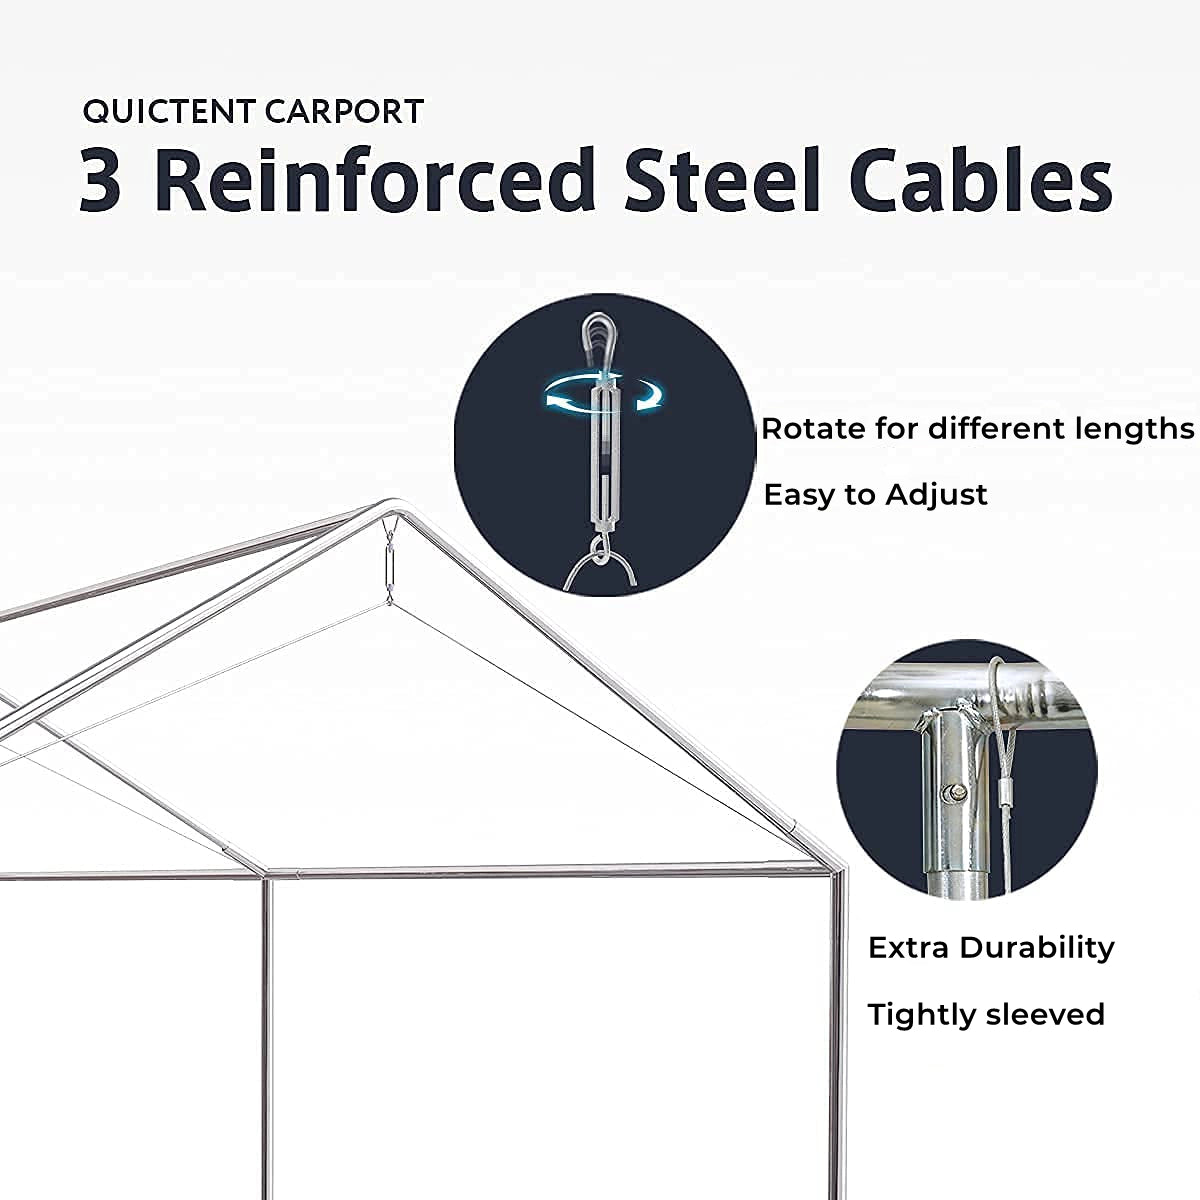 Reinforced Steel Cables